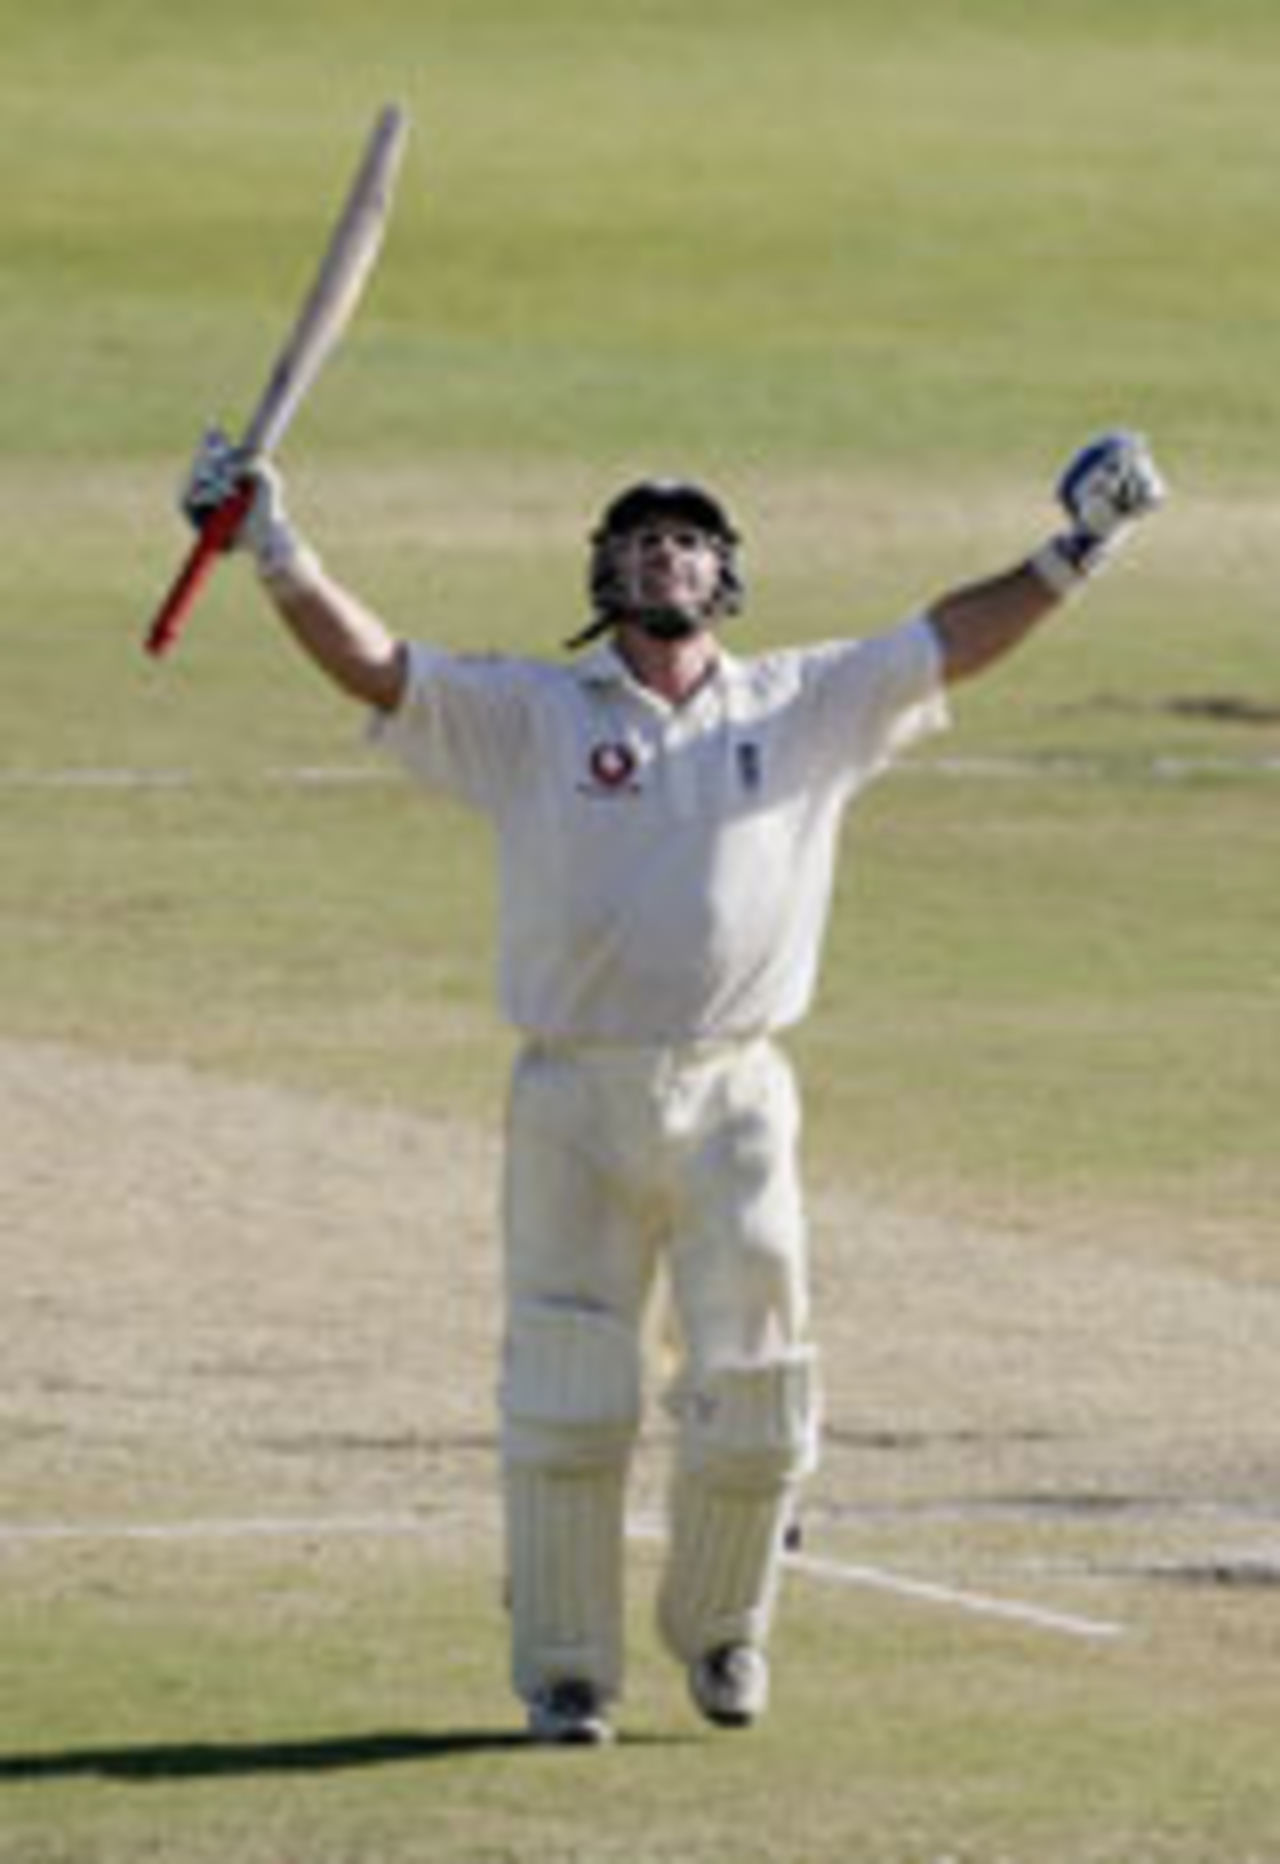 Graham Thorpe celebrates his 16th Test hundred, South Africa v England, 2nd Test, Durban, 4th day, December 29 2004